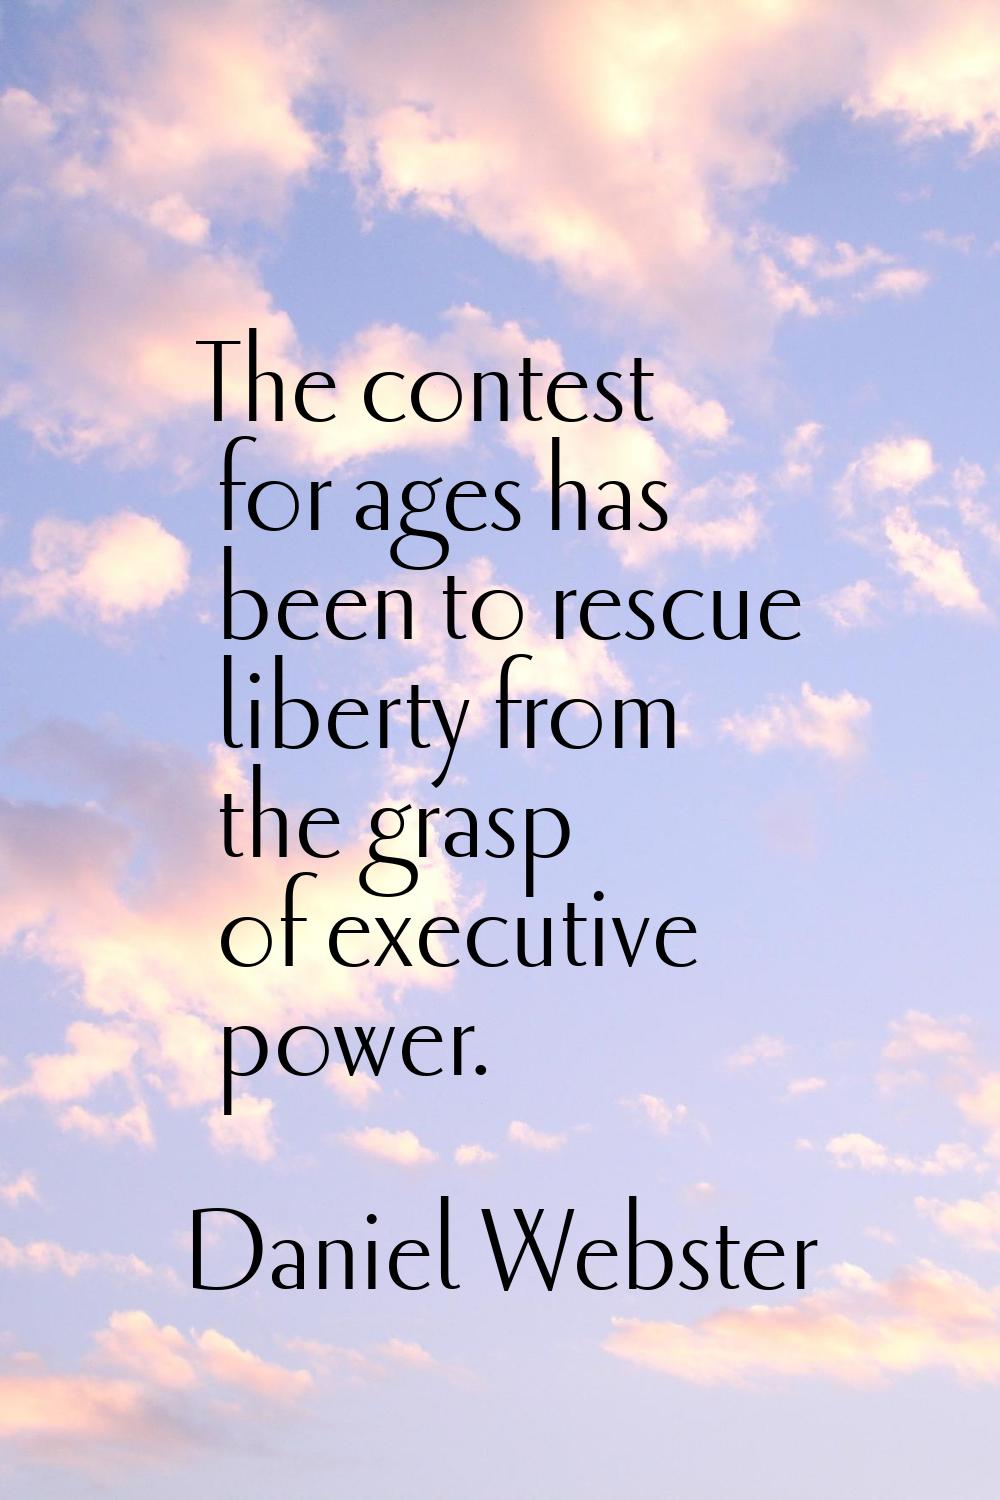 The contest for ages has been to rescue liberty from the grasp of executive power.